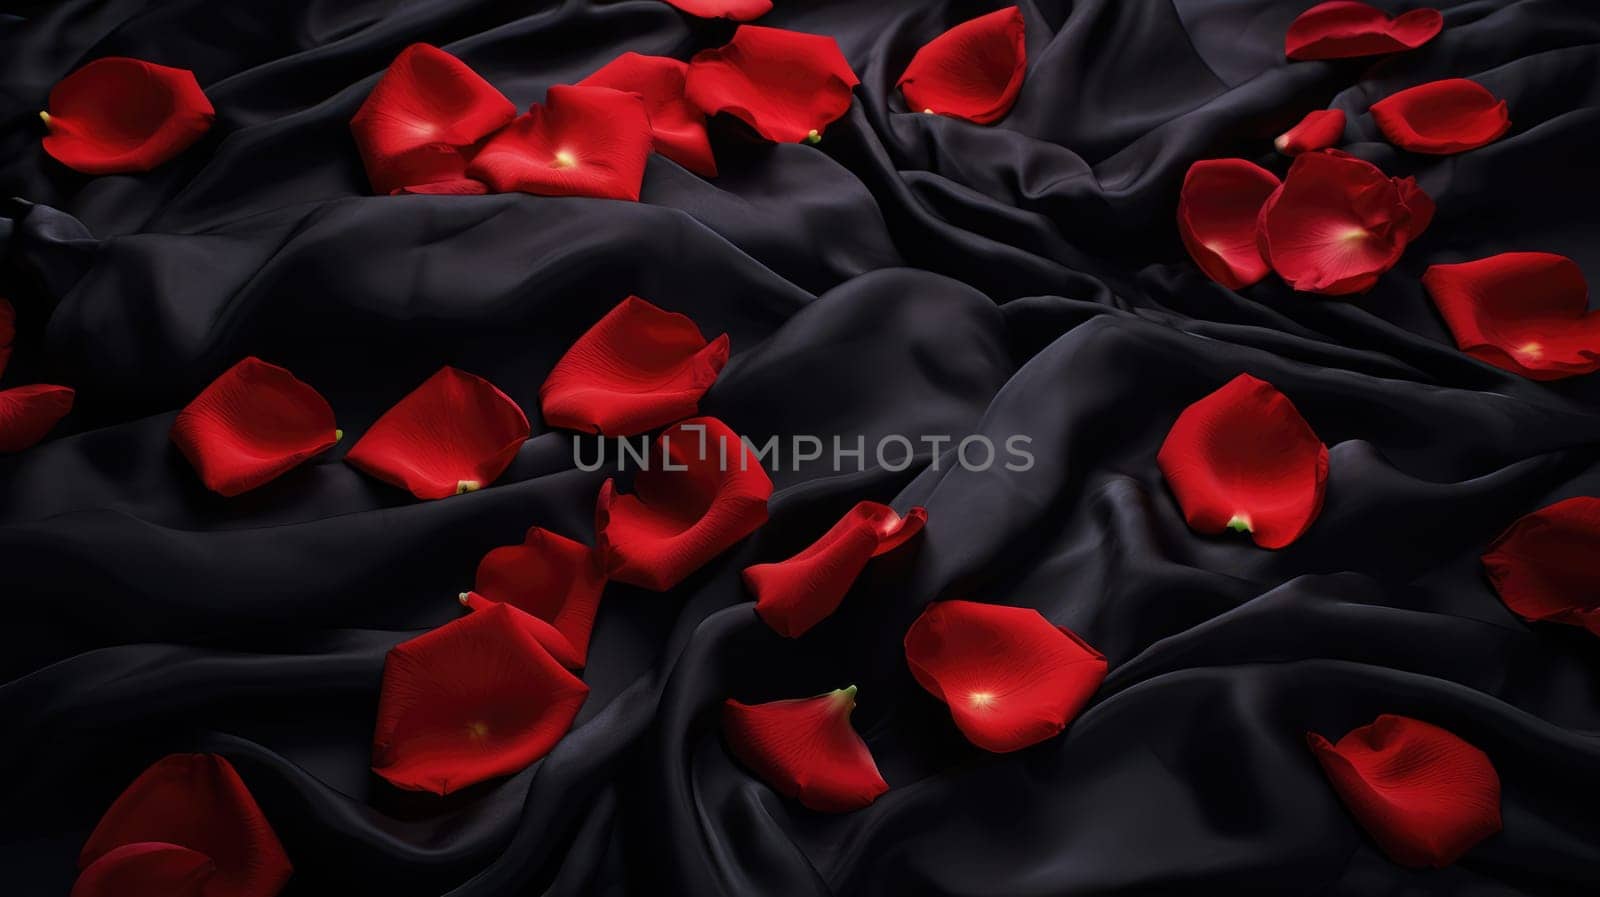 Rose rose petals scattered over black silk satin bed sheets. Romantic visual. by natali_brill